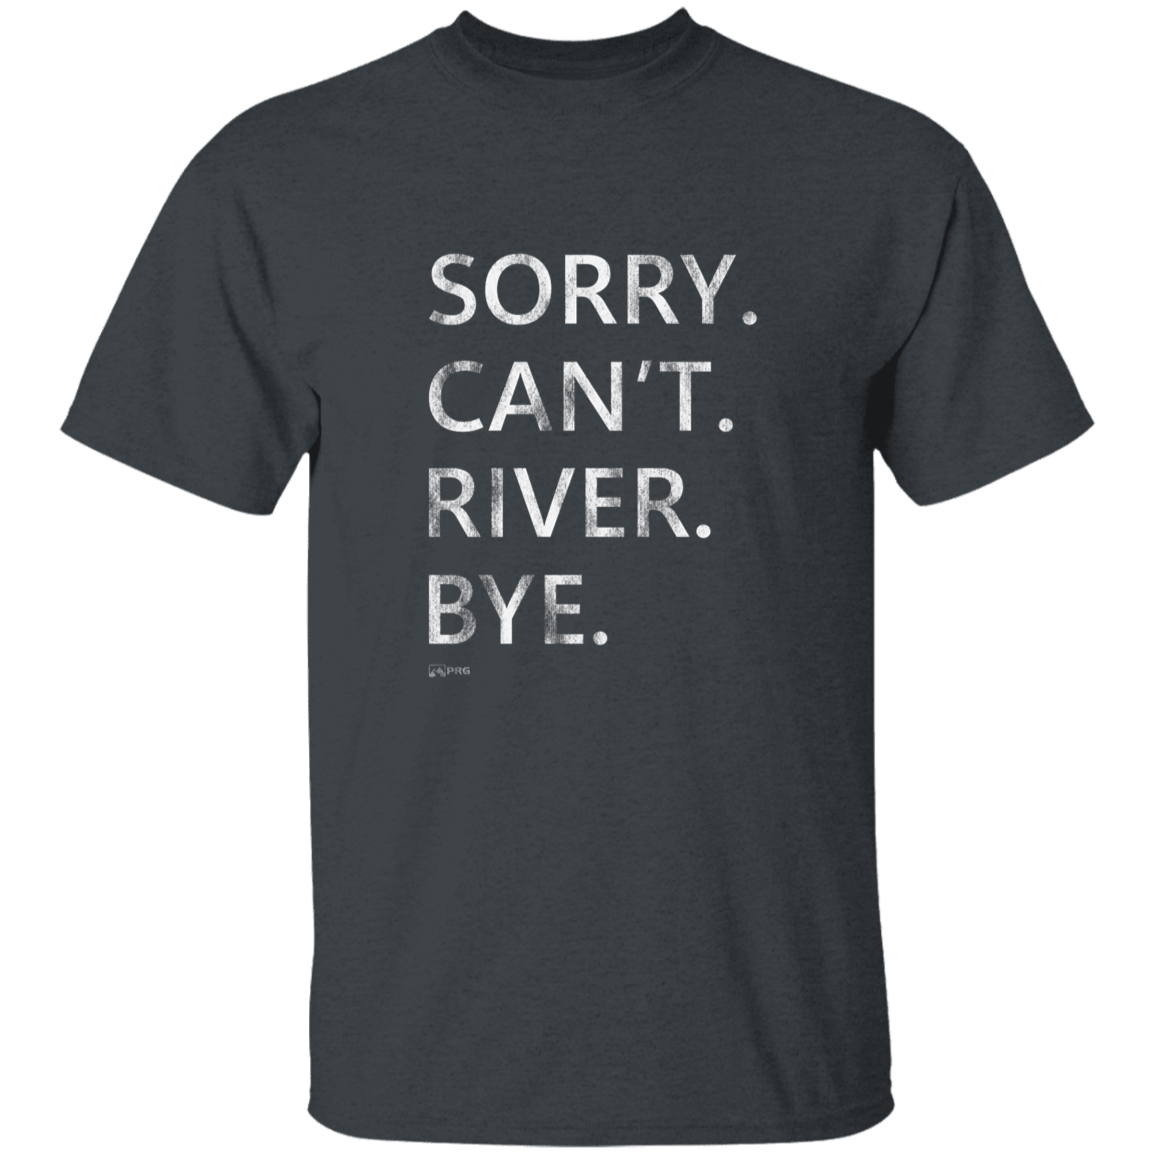 Sorry. Can't. River. Bye. - Youth Shirt